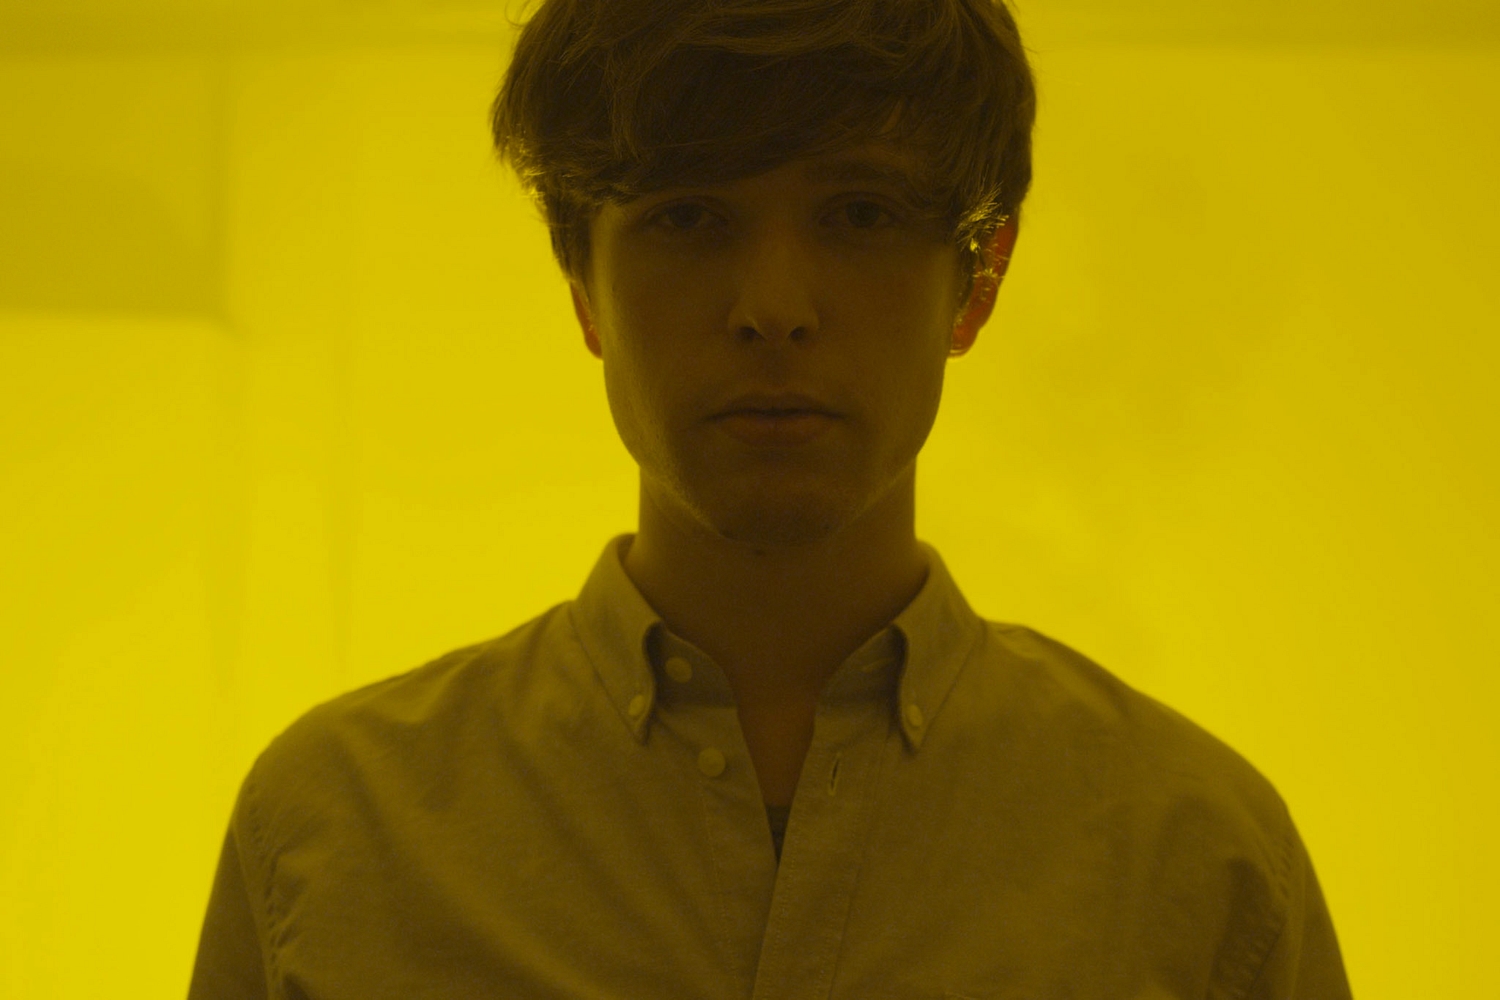 James Blake breaking his ‘Radio Silence’ is set to be one of 2016’s defining moments